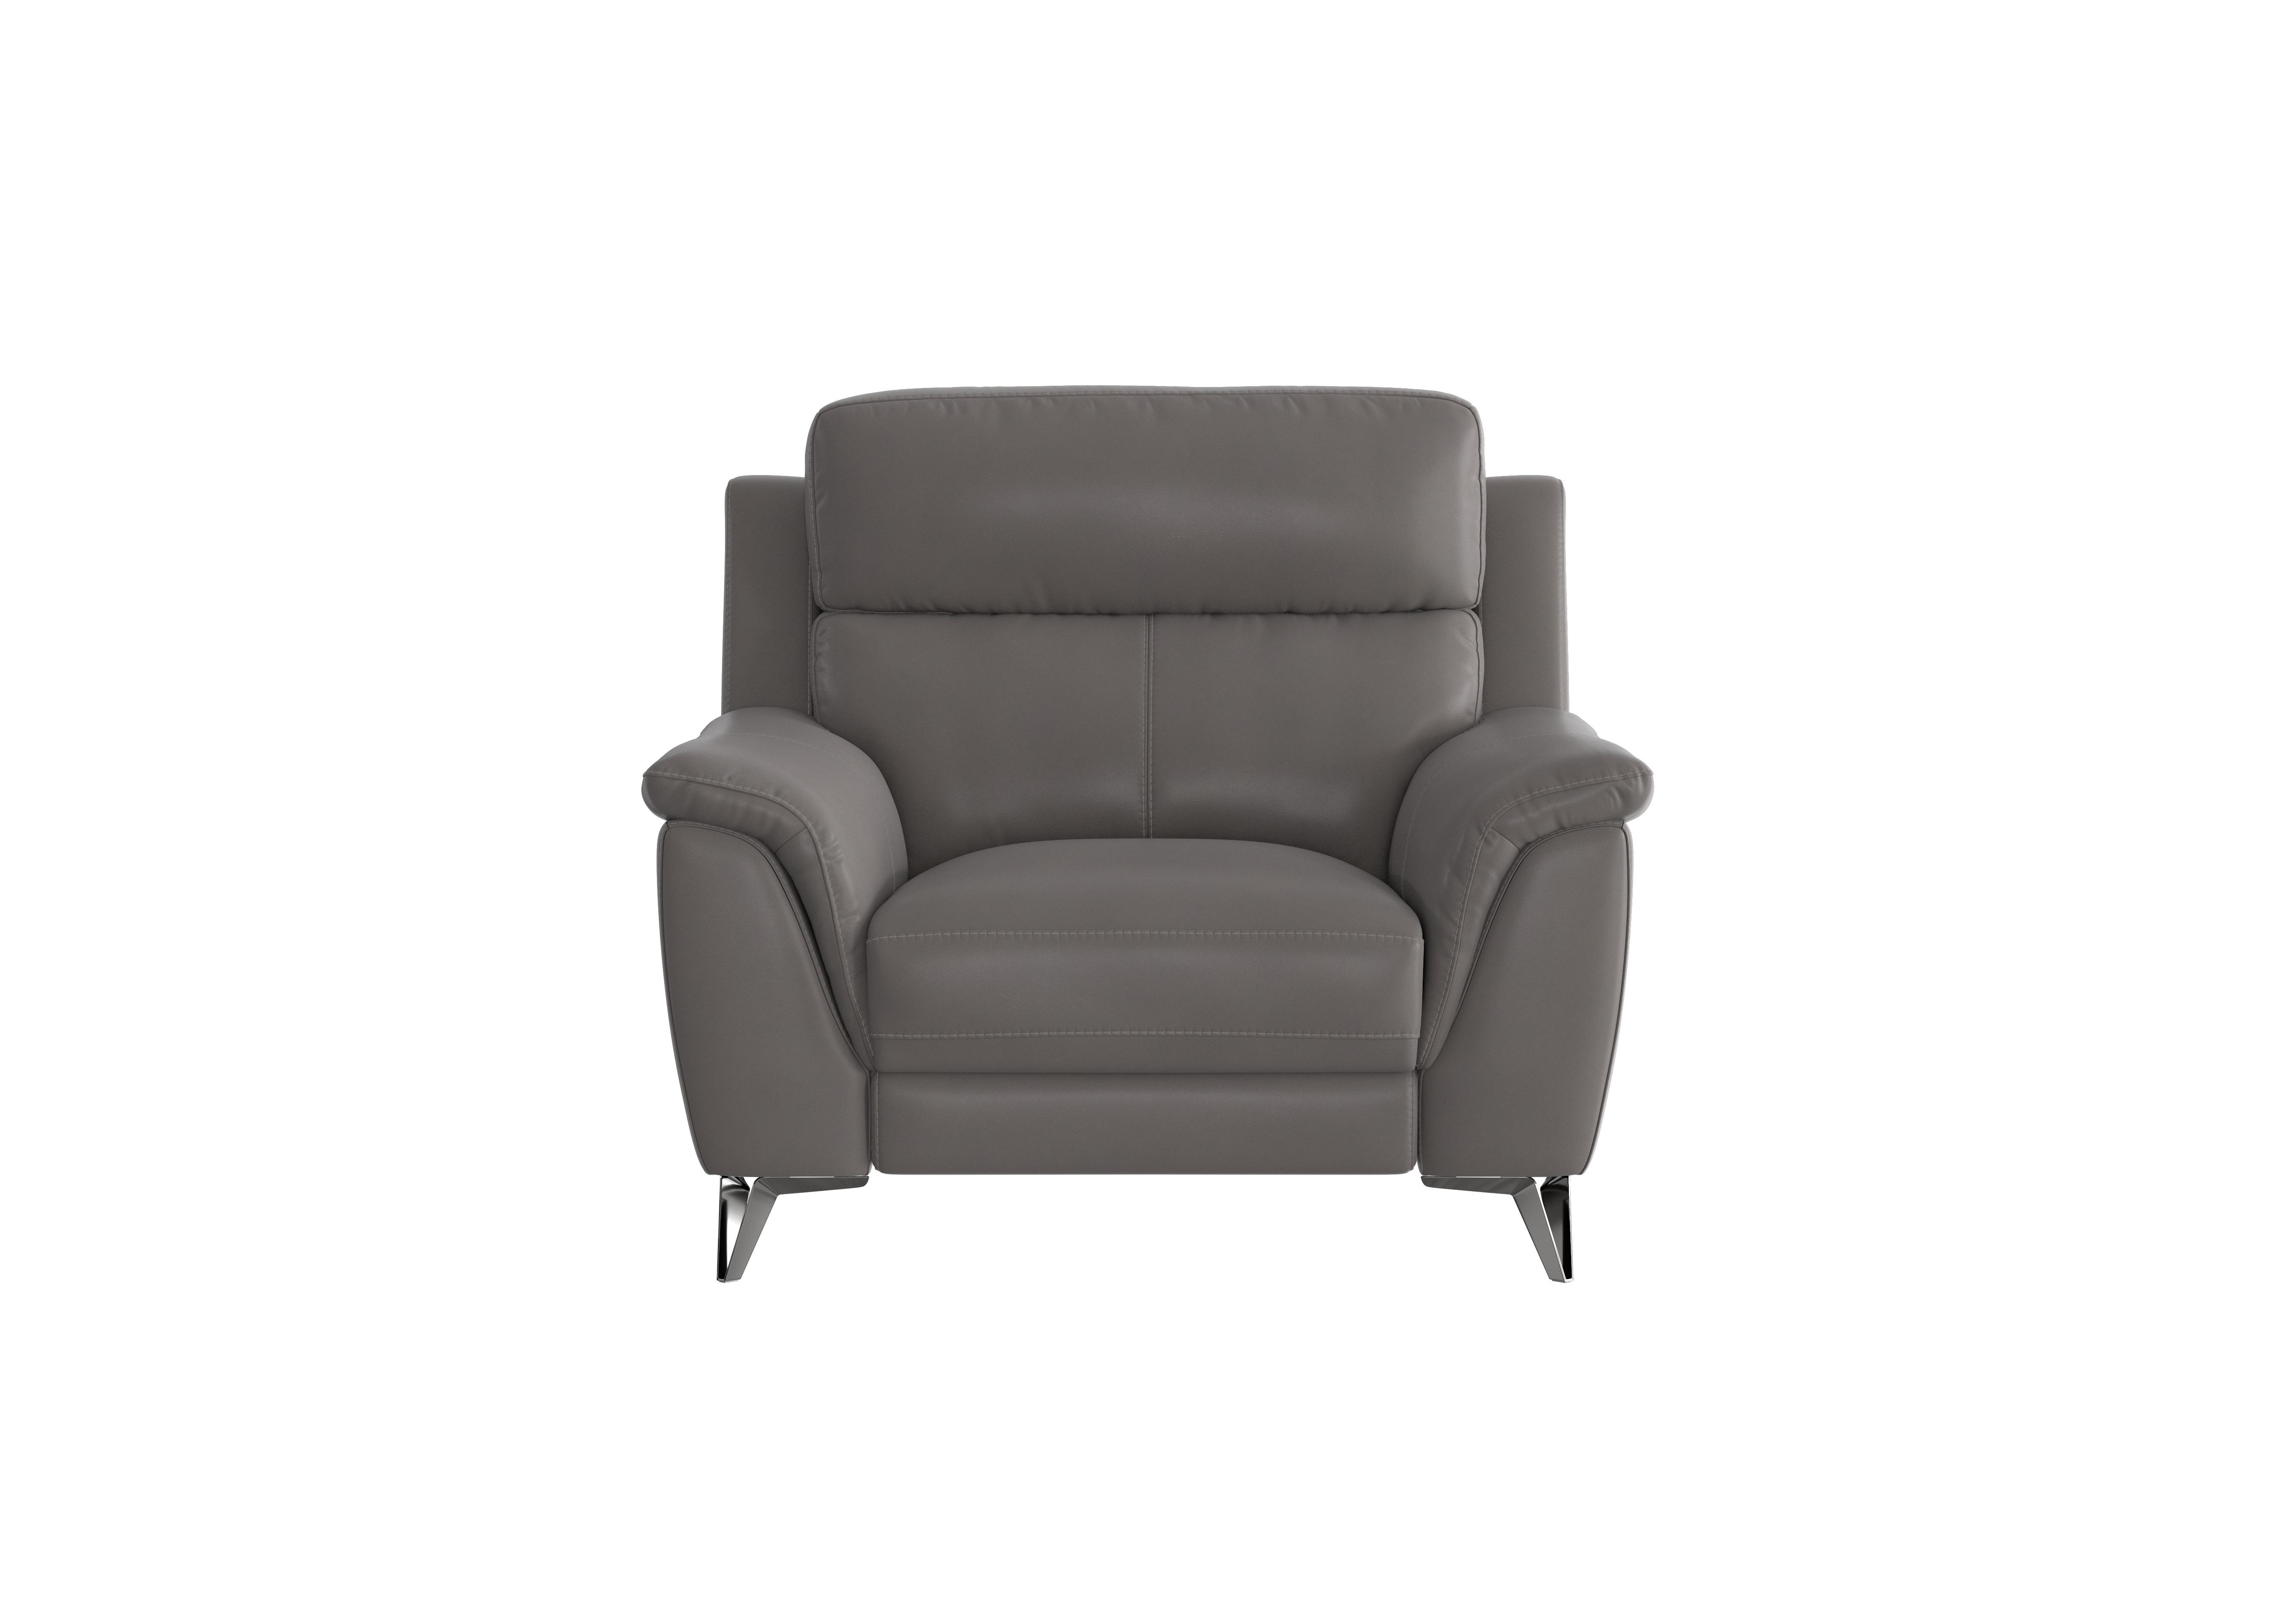 Contempo Leather Armchair in Bv-042e Elephant on Furniture Village